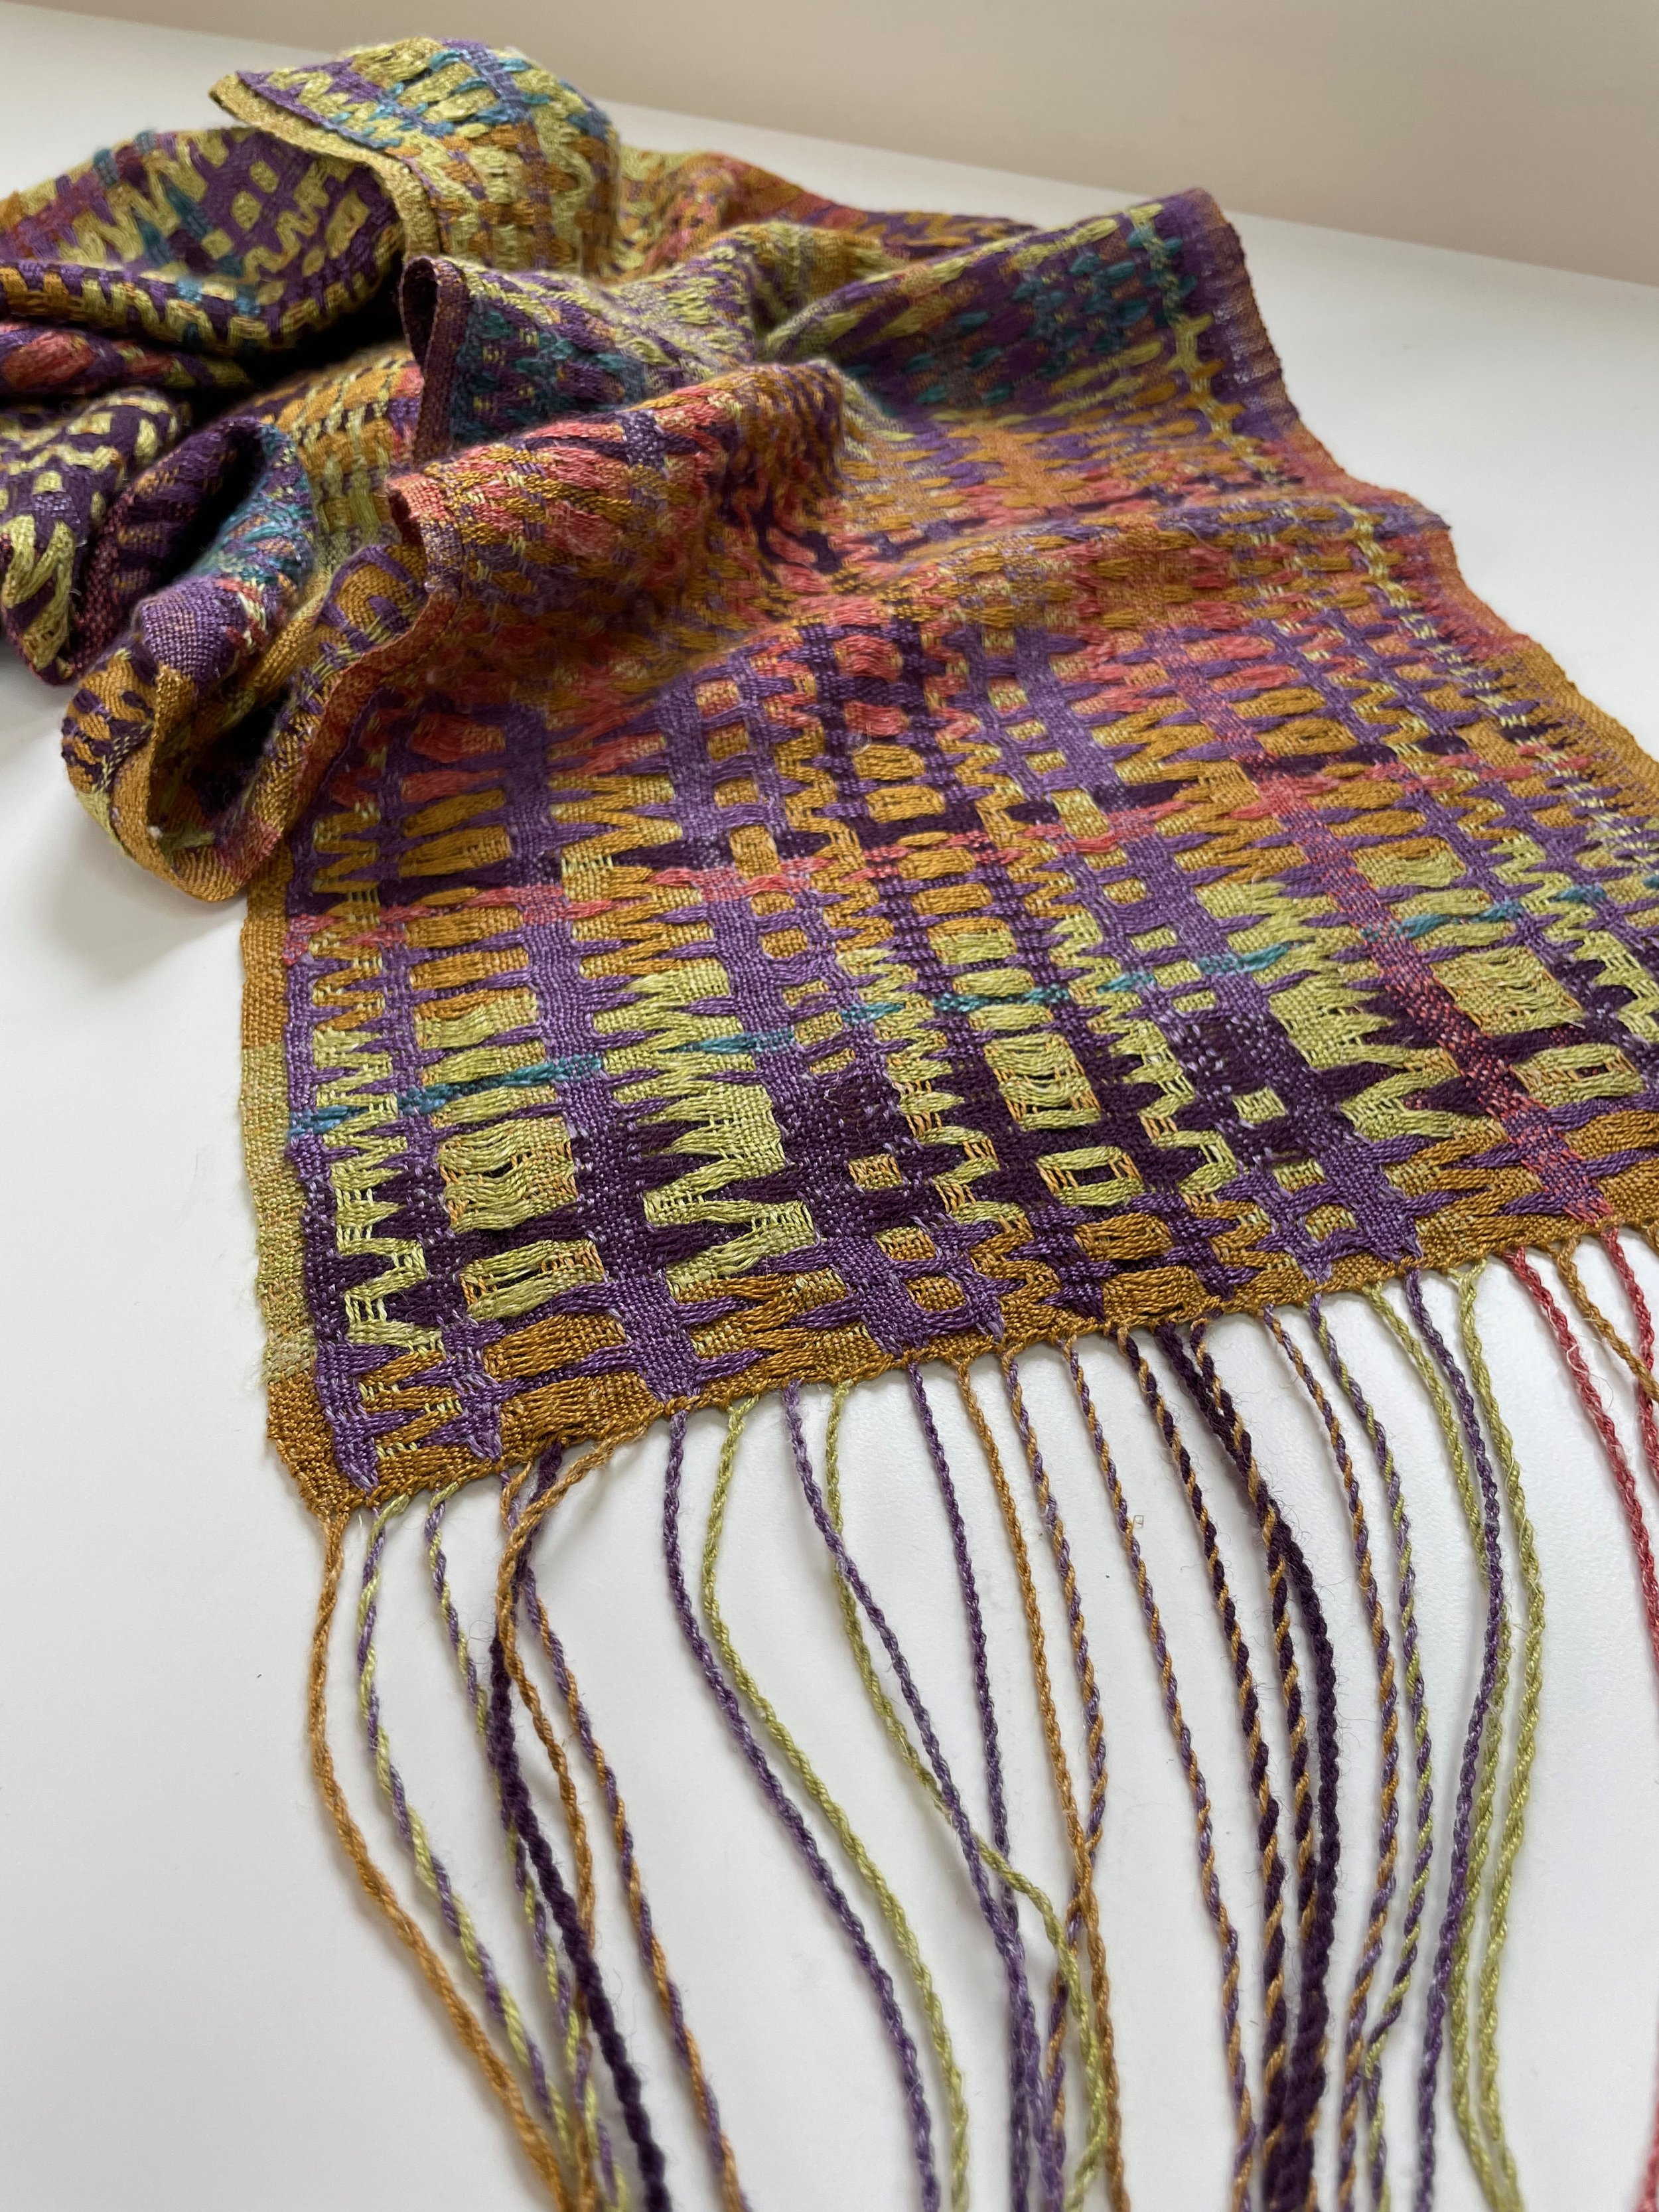 DWild Handwoven Textiles | one of a kind textiles and weaving classes